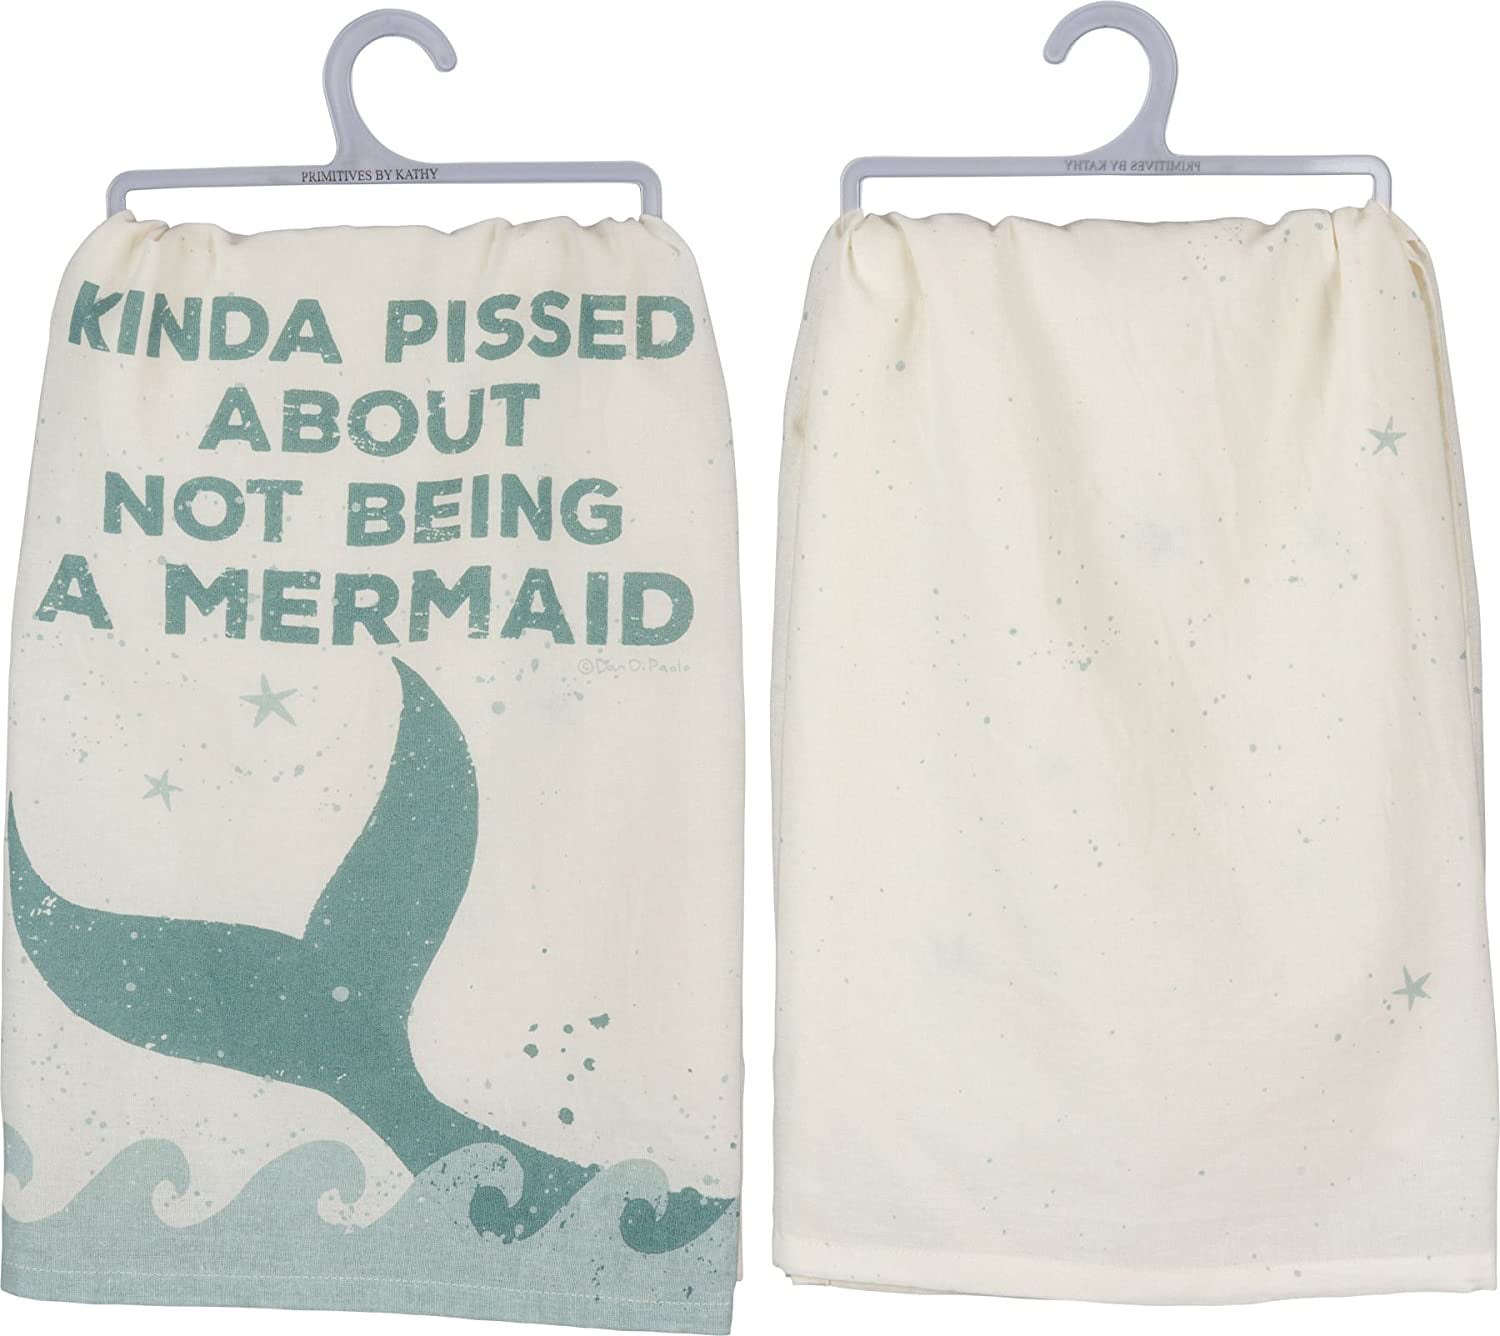 Primitives by Kathy Dish Towel " KINDA PISSED ABOUT NOT BEING A MERMAID "